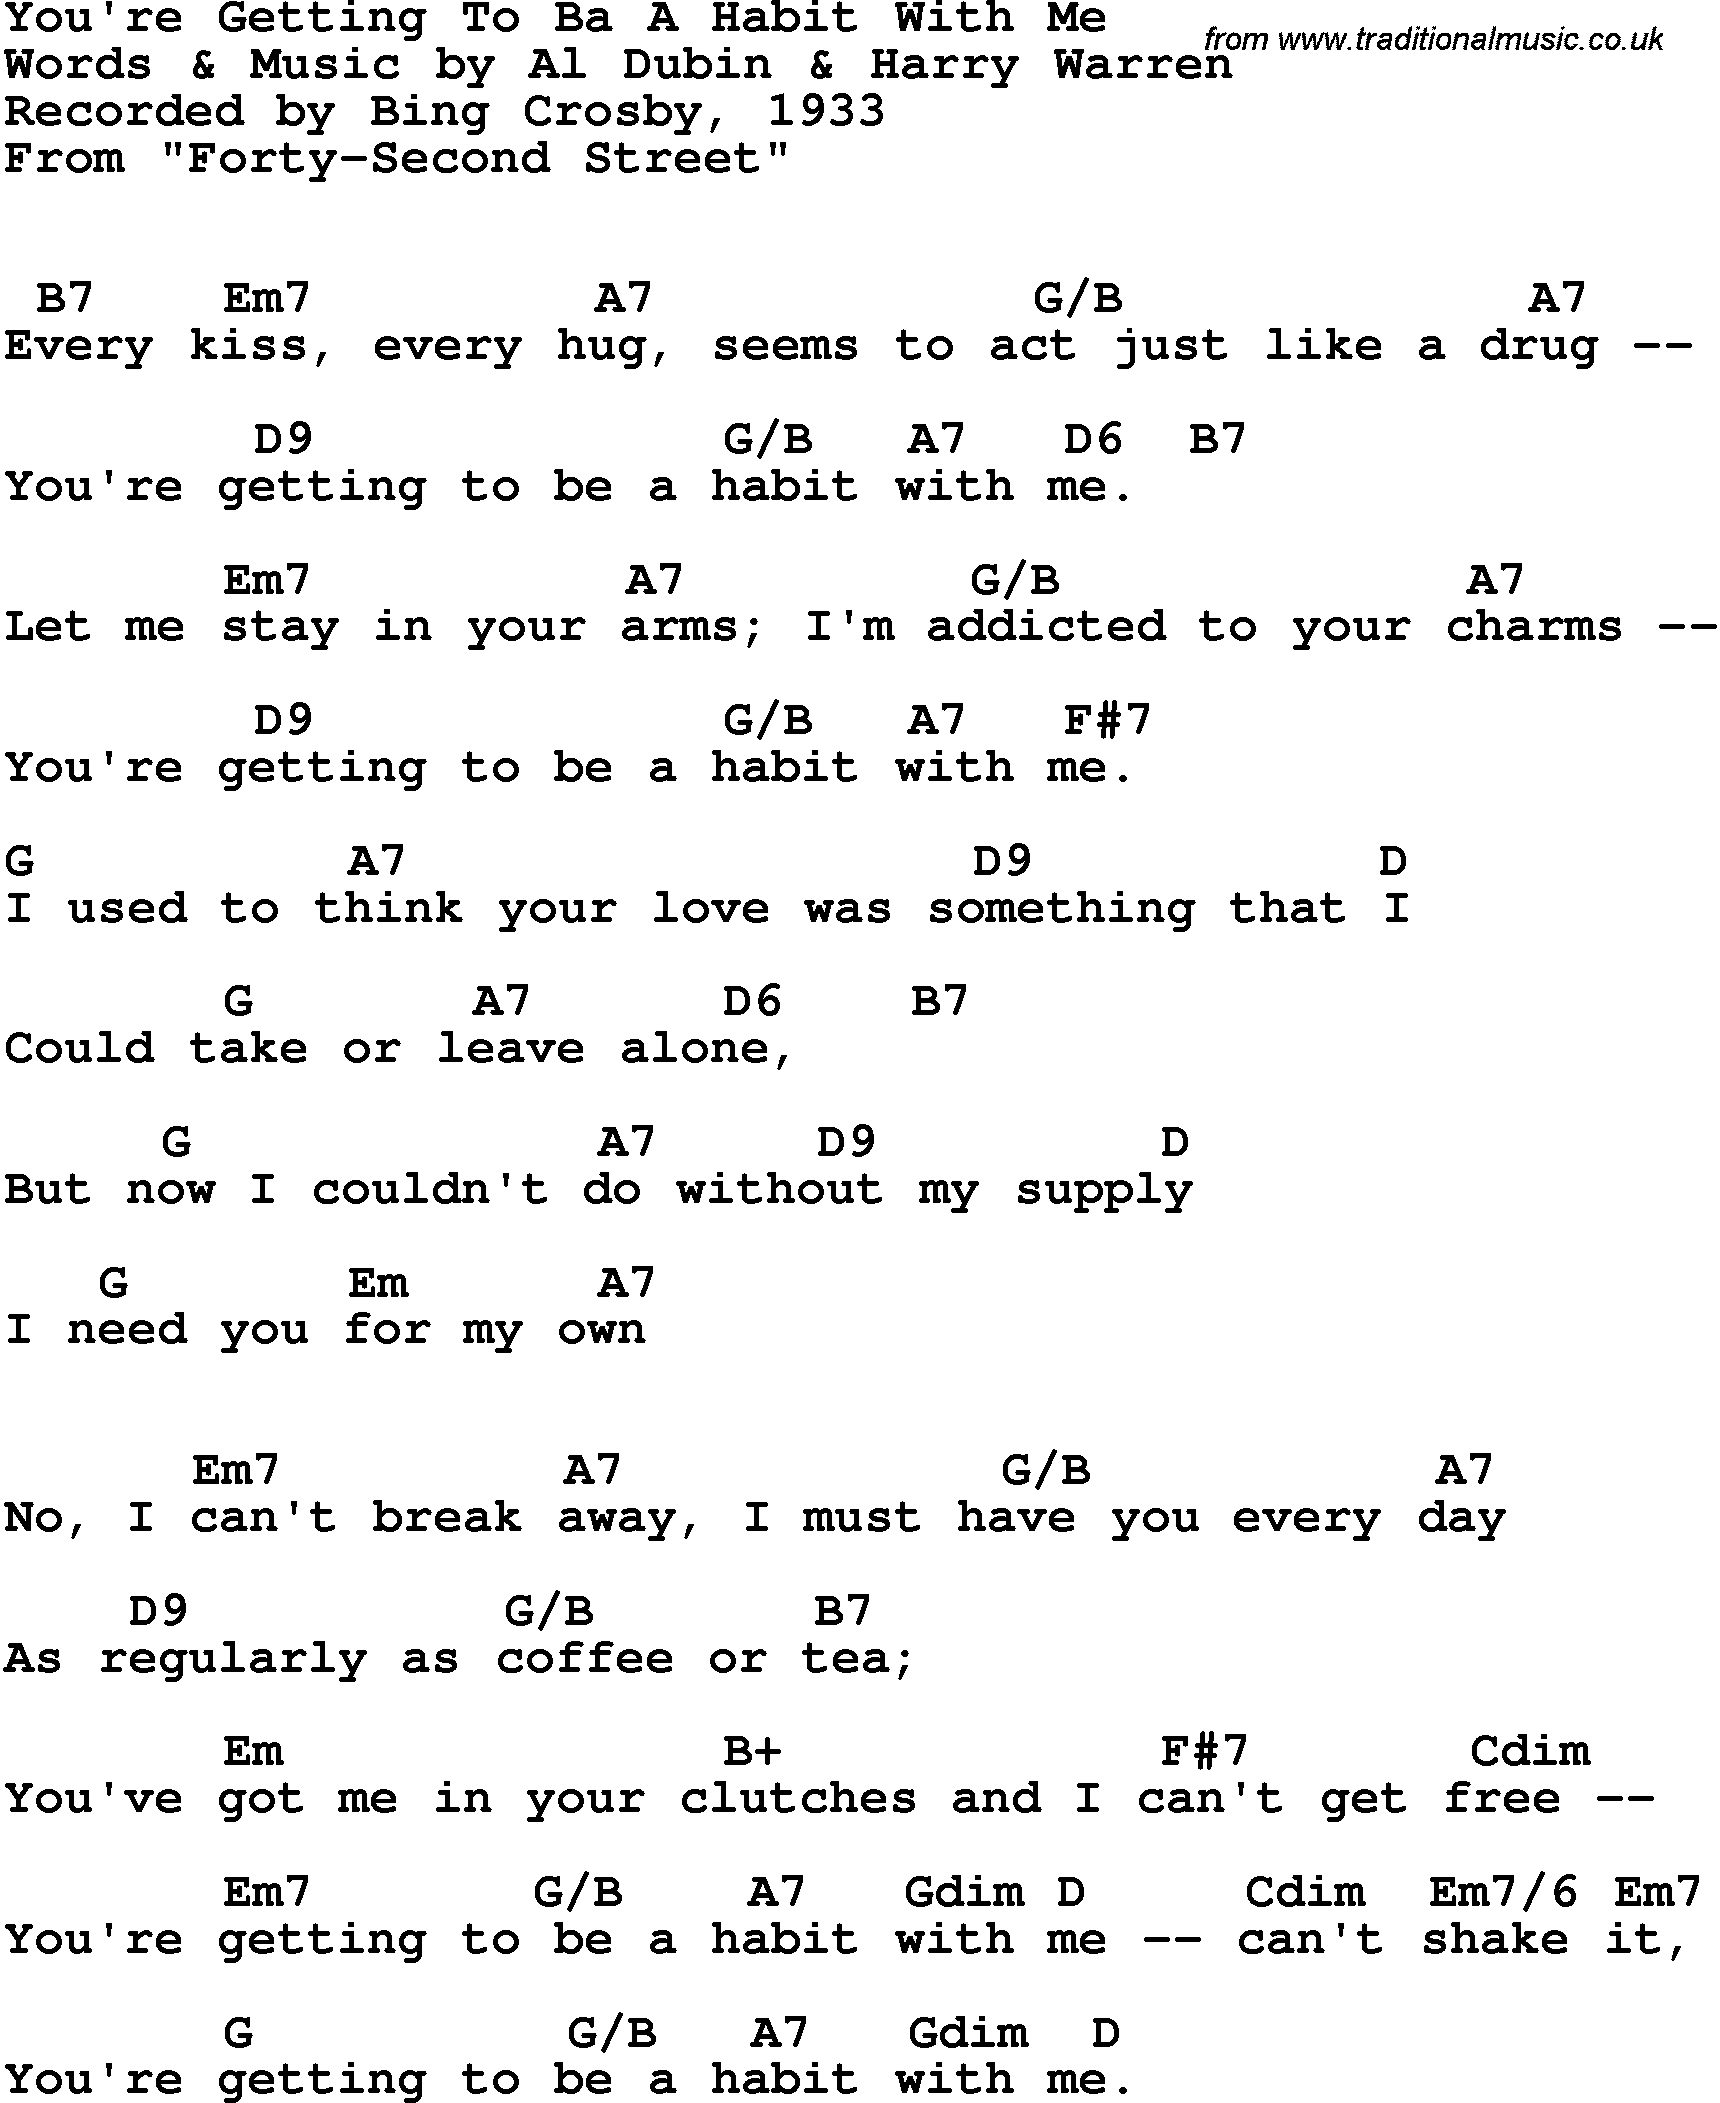 Song Lyrics with guitar chords for You're Getting To Be A Habit With Me - Bing Crosby, 1933